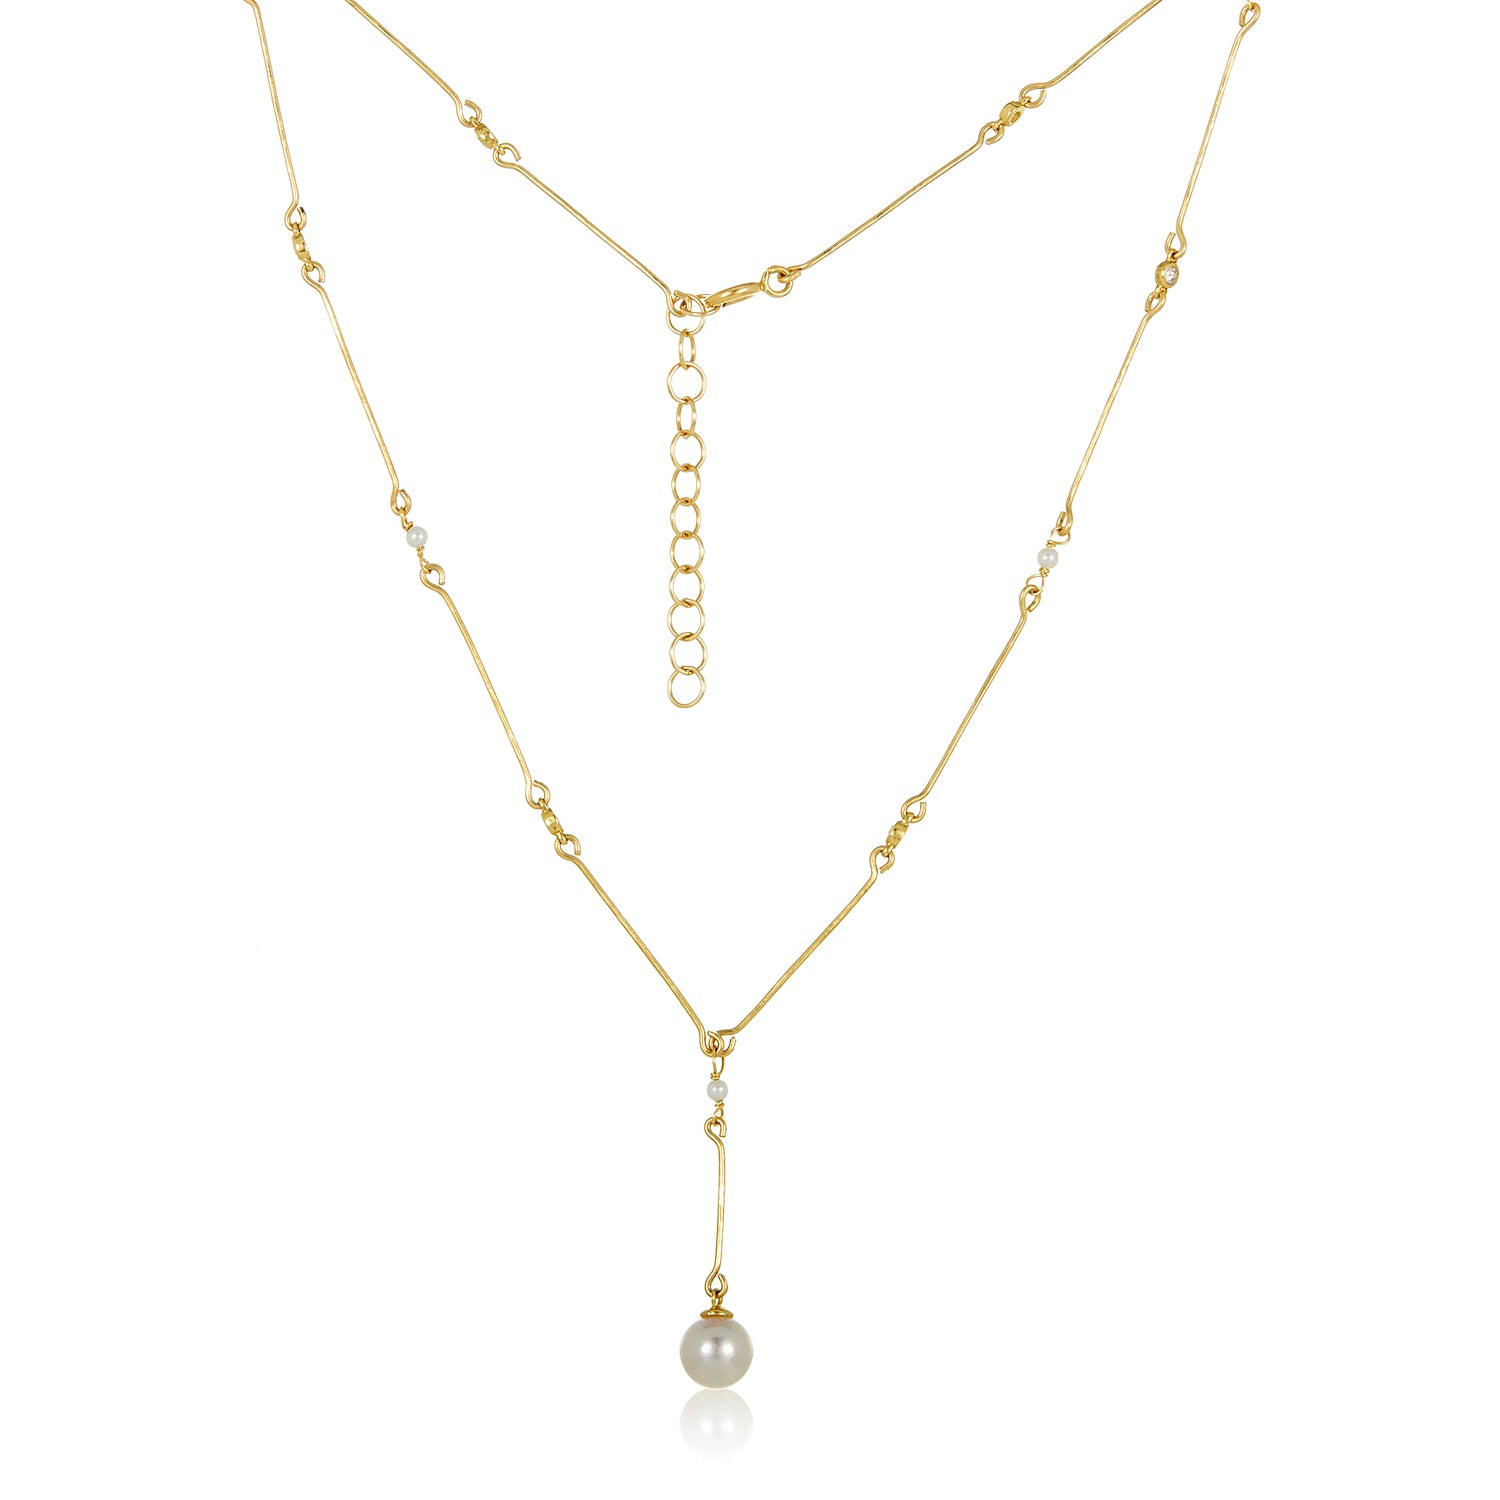 Hammered Chain with Pearl and Diamond Necklace in 14k